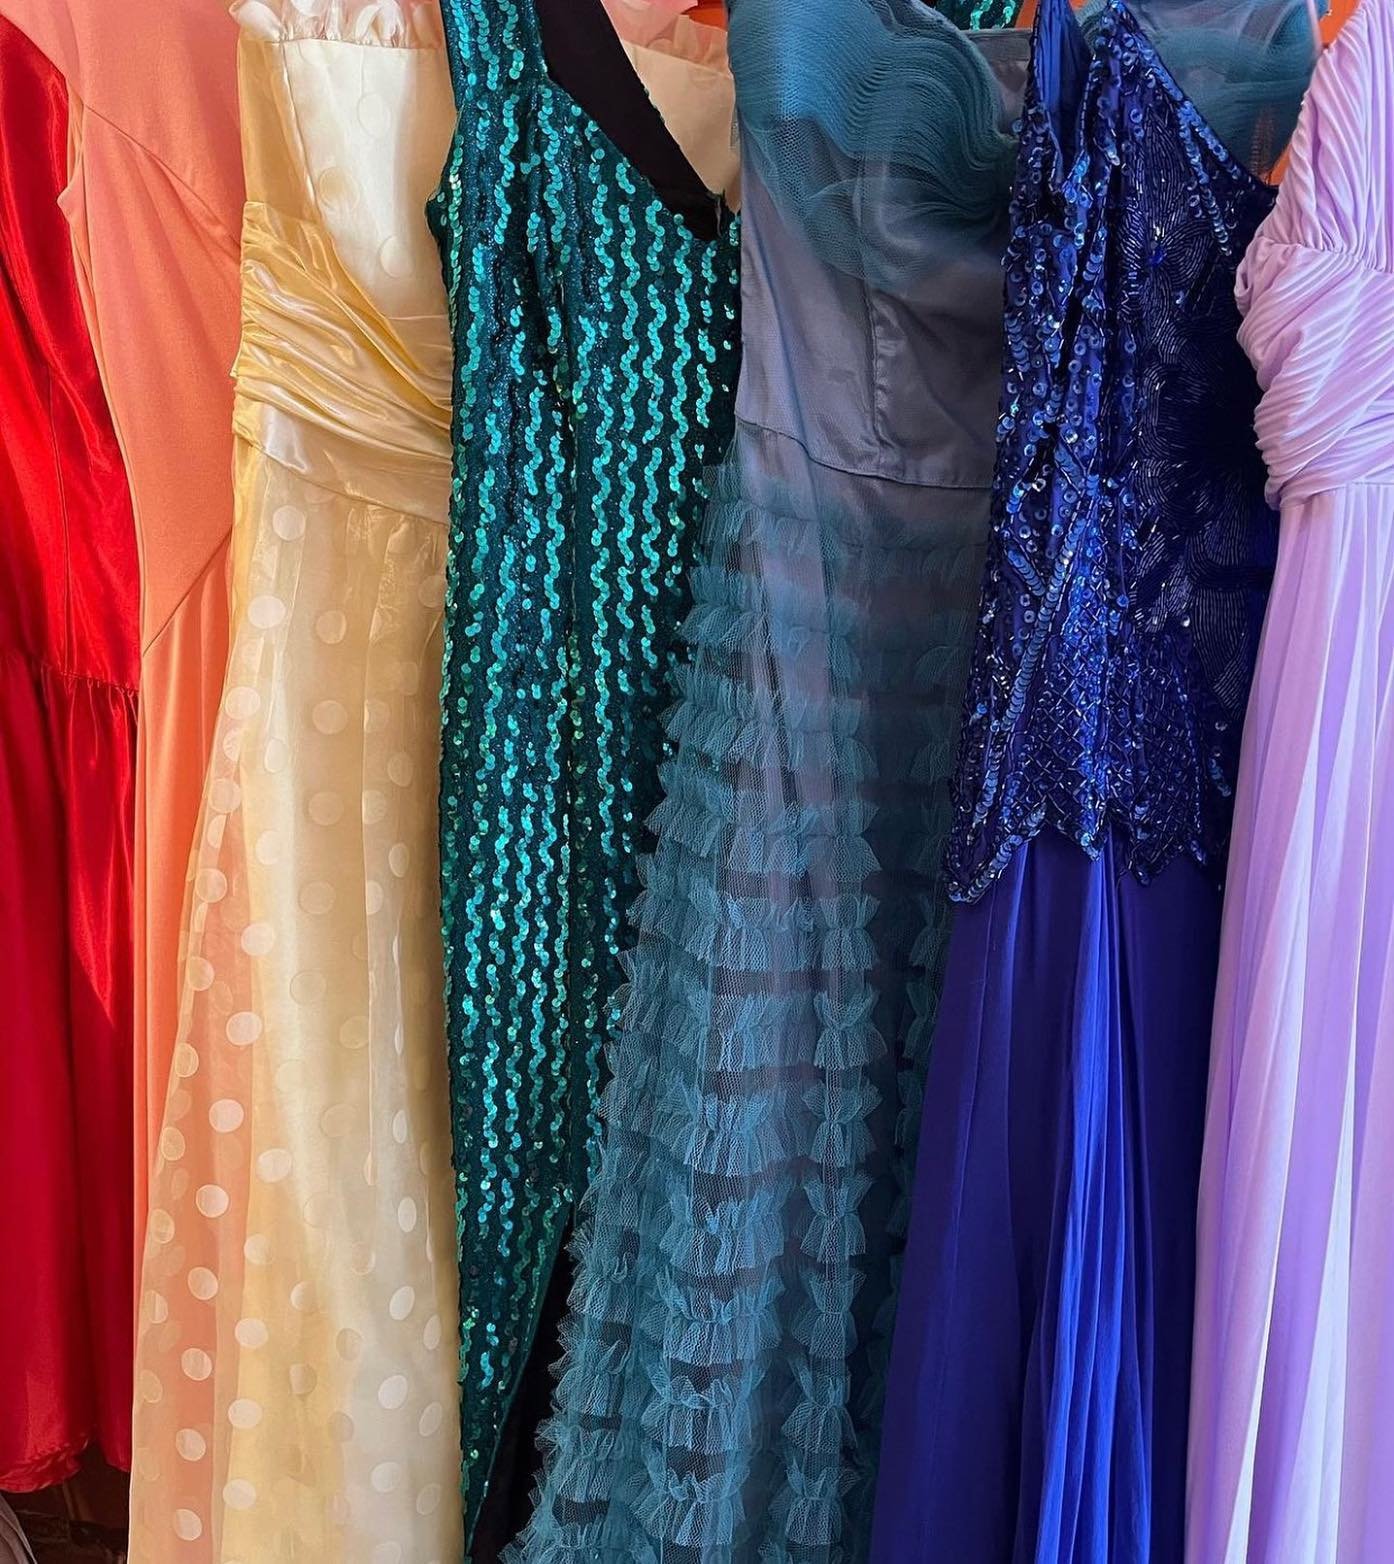 VINTAGE EVENING GOWNS BY @colbysclothesmobile 
💃🏼💃🏼💃🏼FIND HER OUT IN THE BEER GARDEN THIS SUNDAY MAY 19! 

The Baltimore Vintage Expo is a highly curated one-day-only event celebrating the thriving community of exclusively vintage &amp; antique